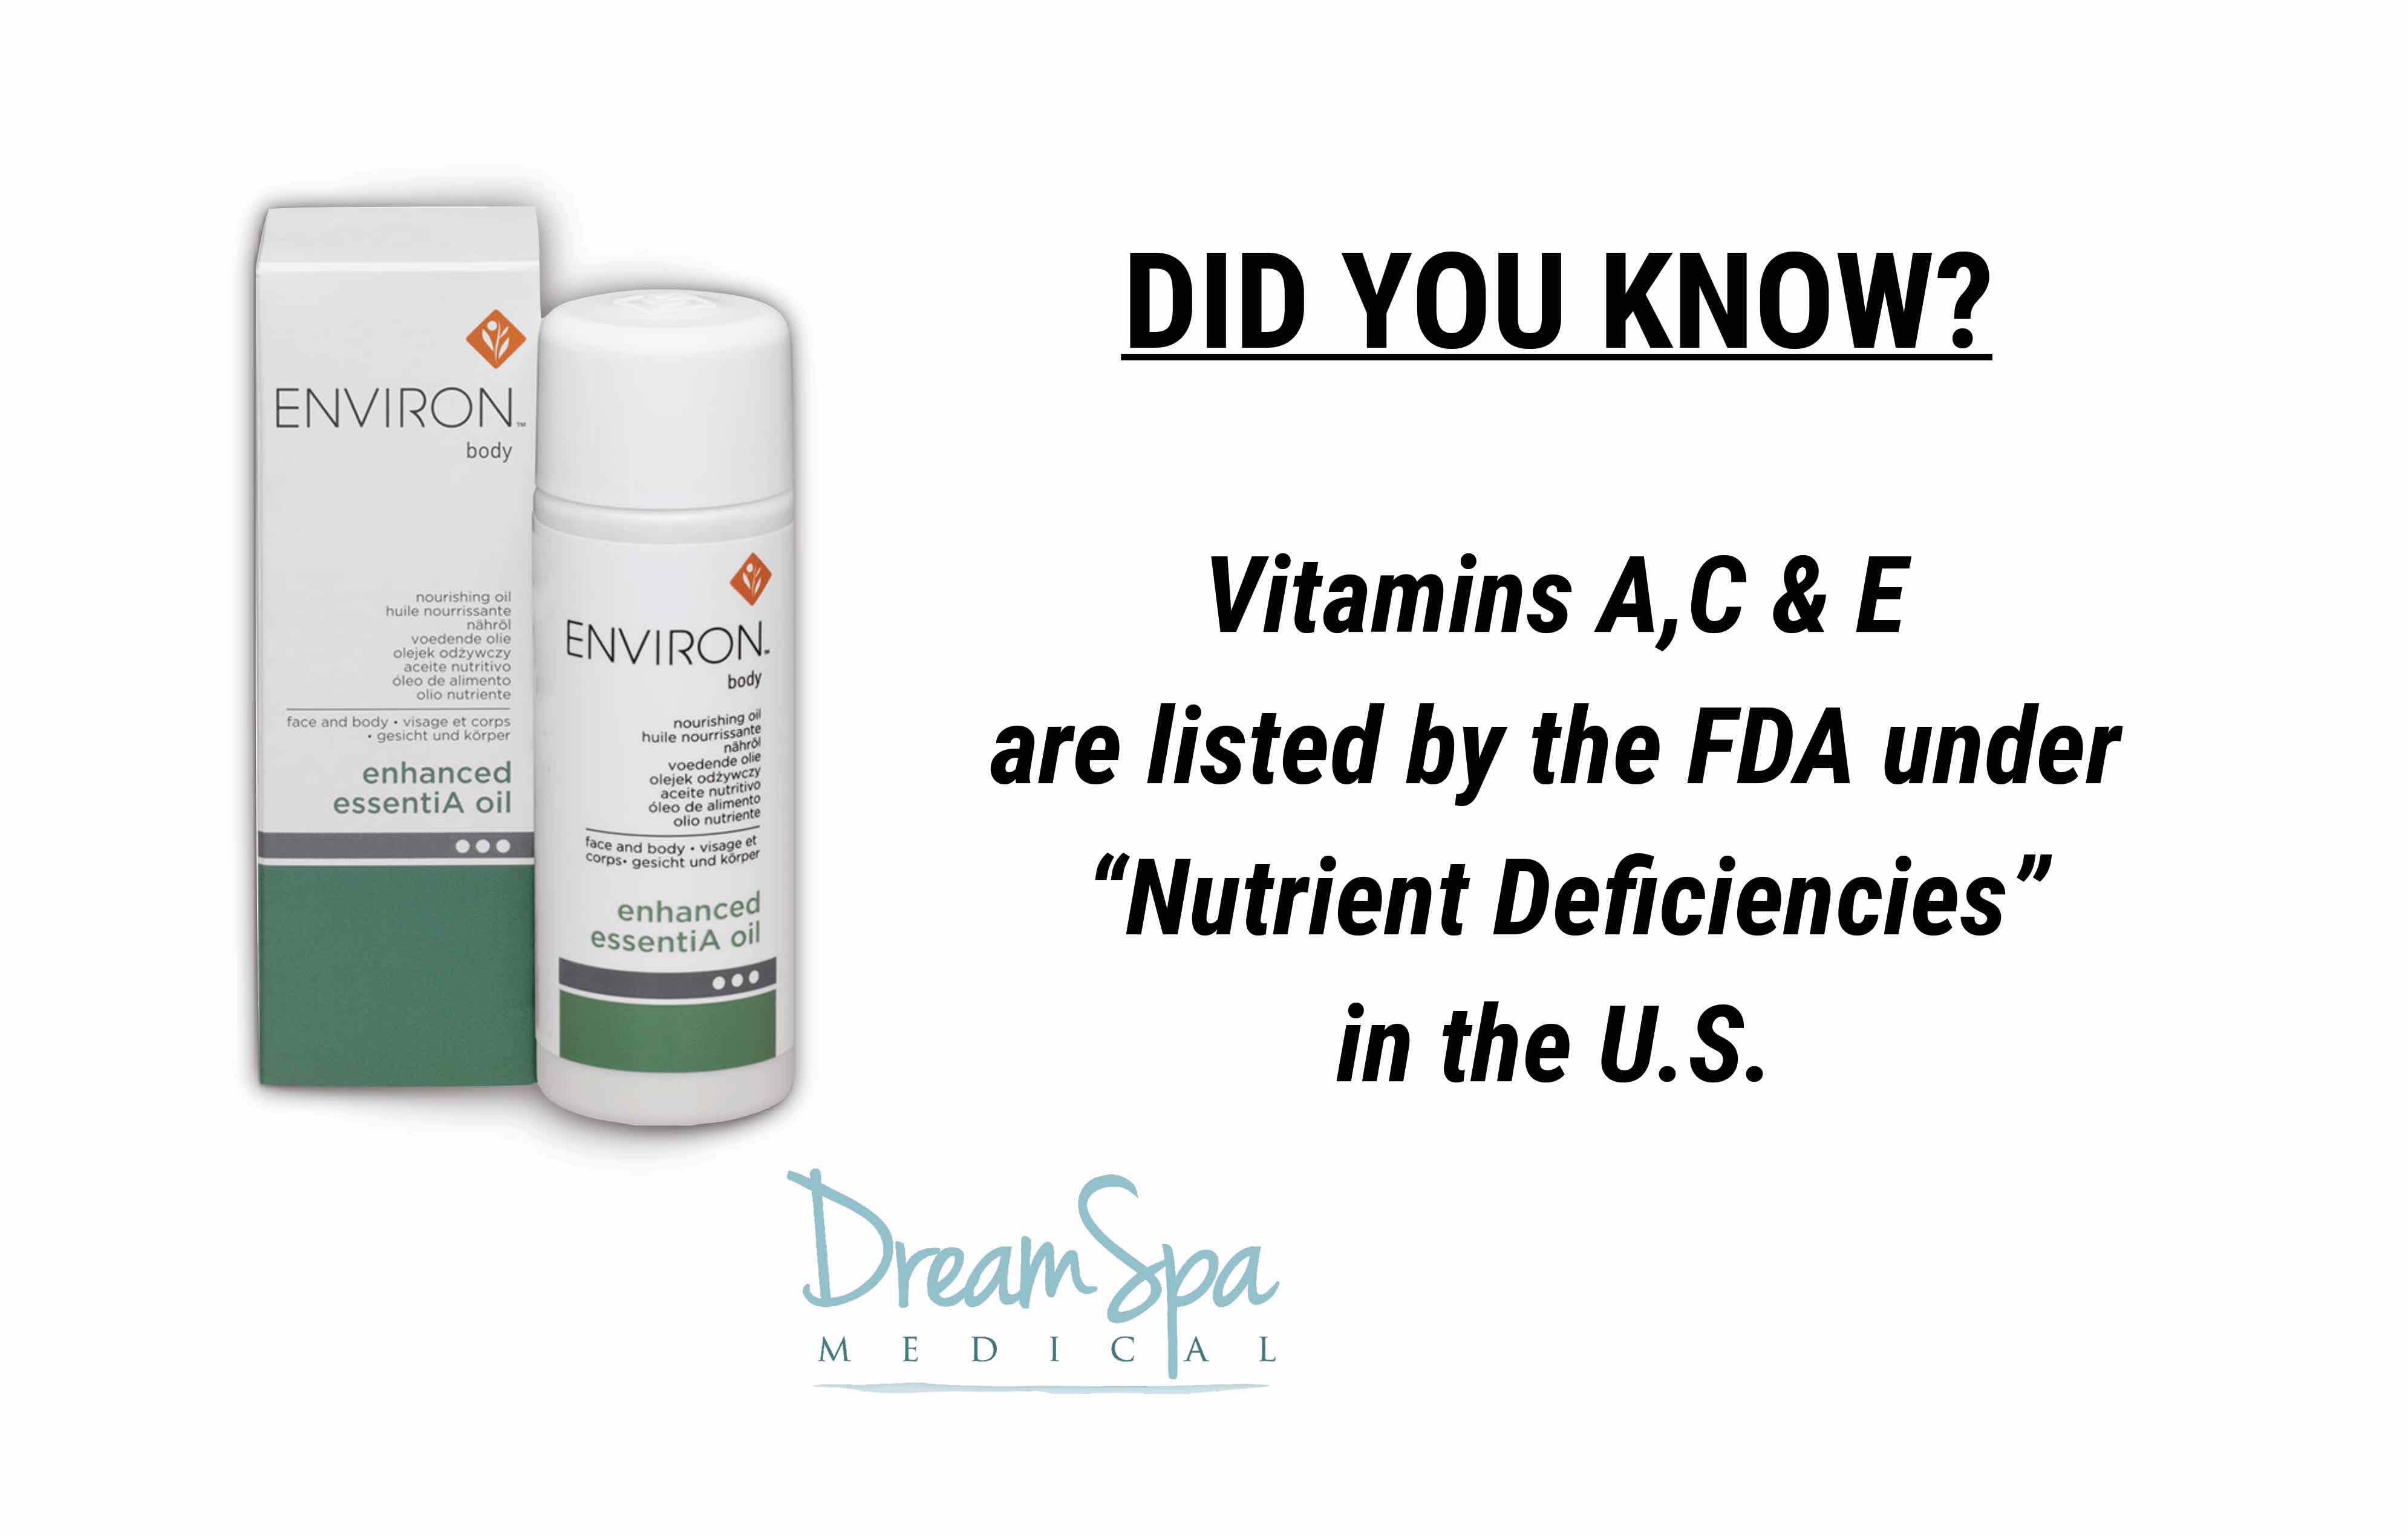 Dream Spa Medical Blog | Vitamins A, C & E are Listed under Nutrient Deficiencies in US